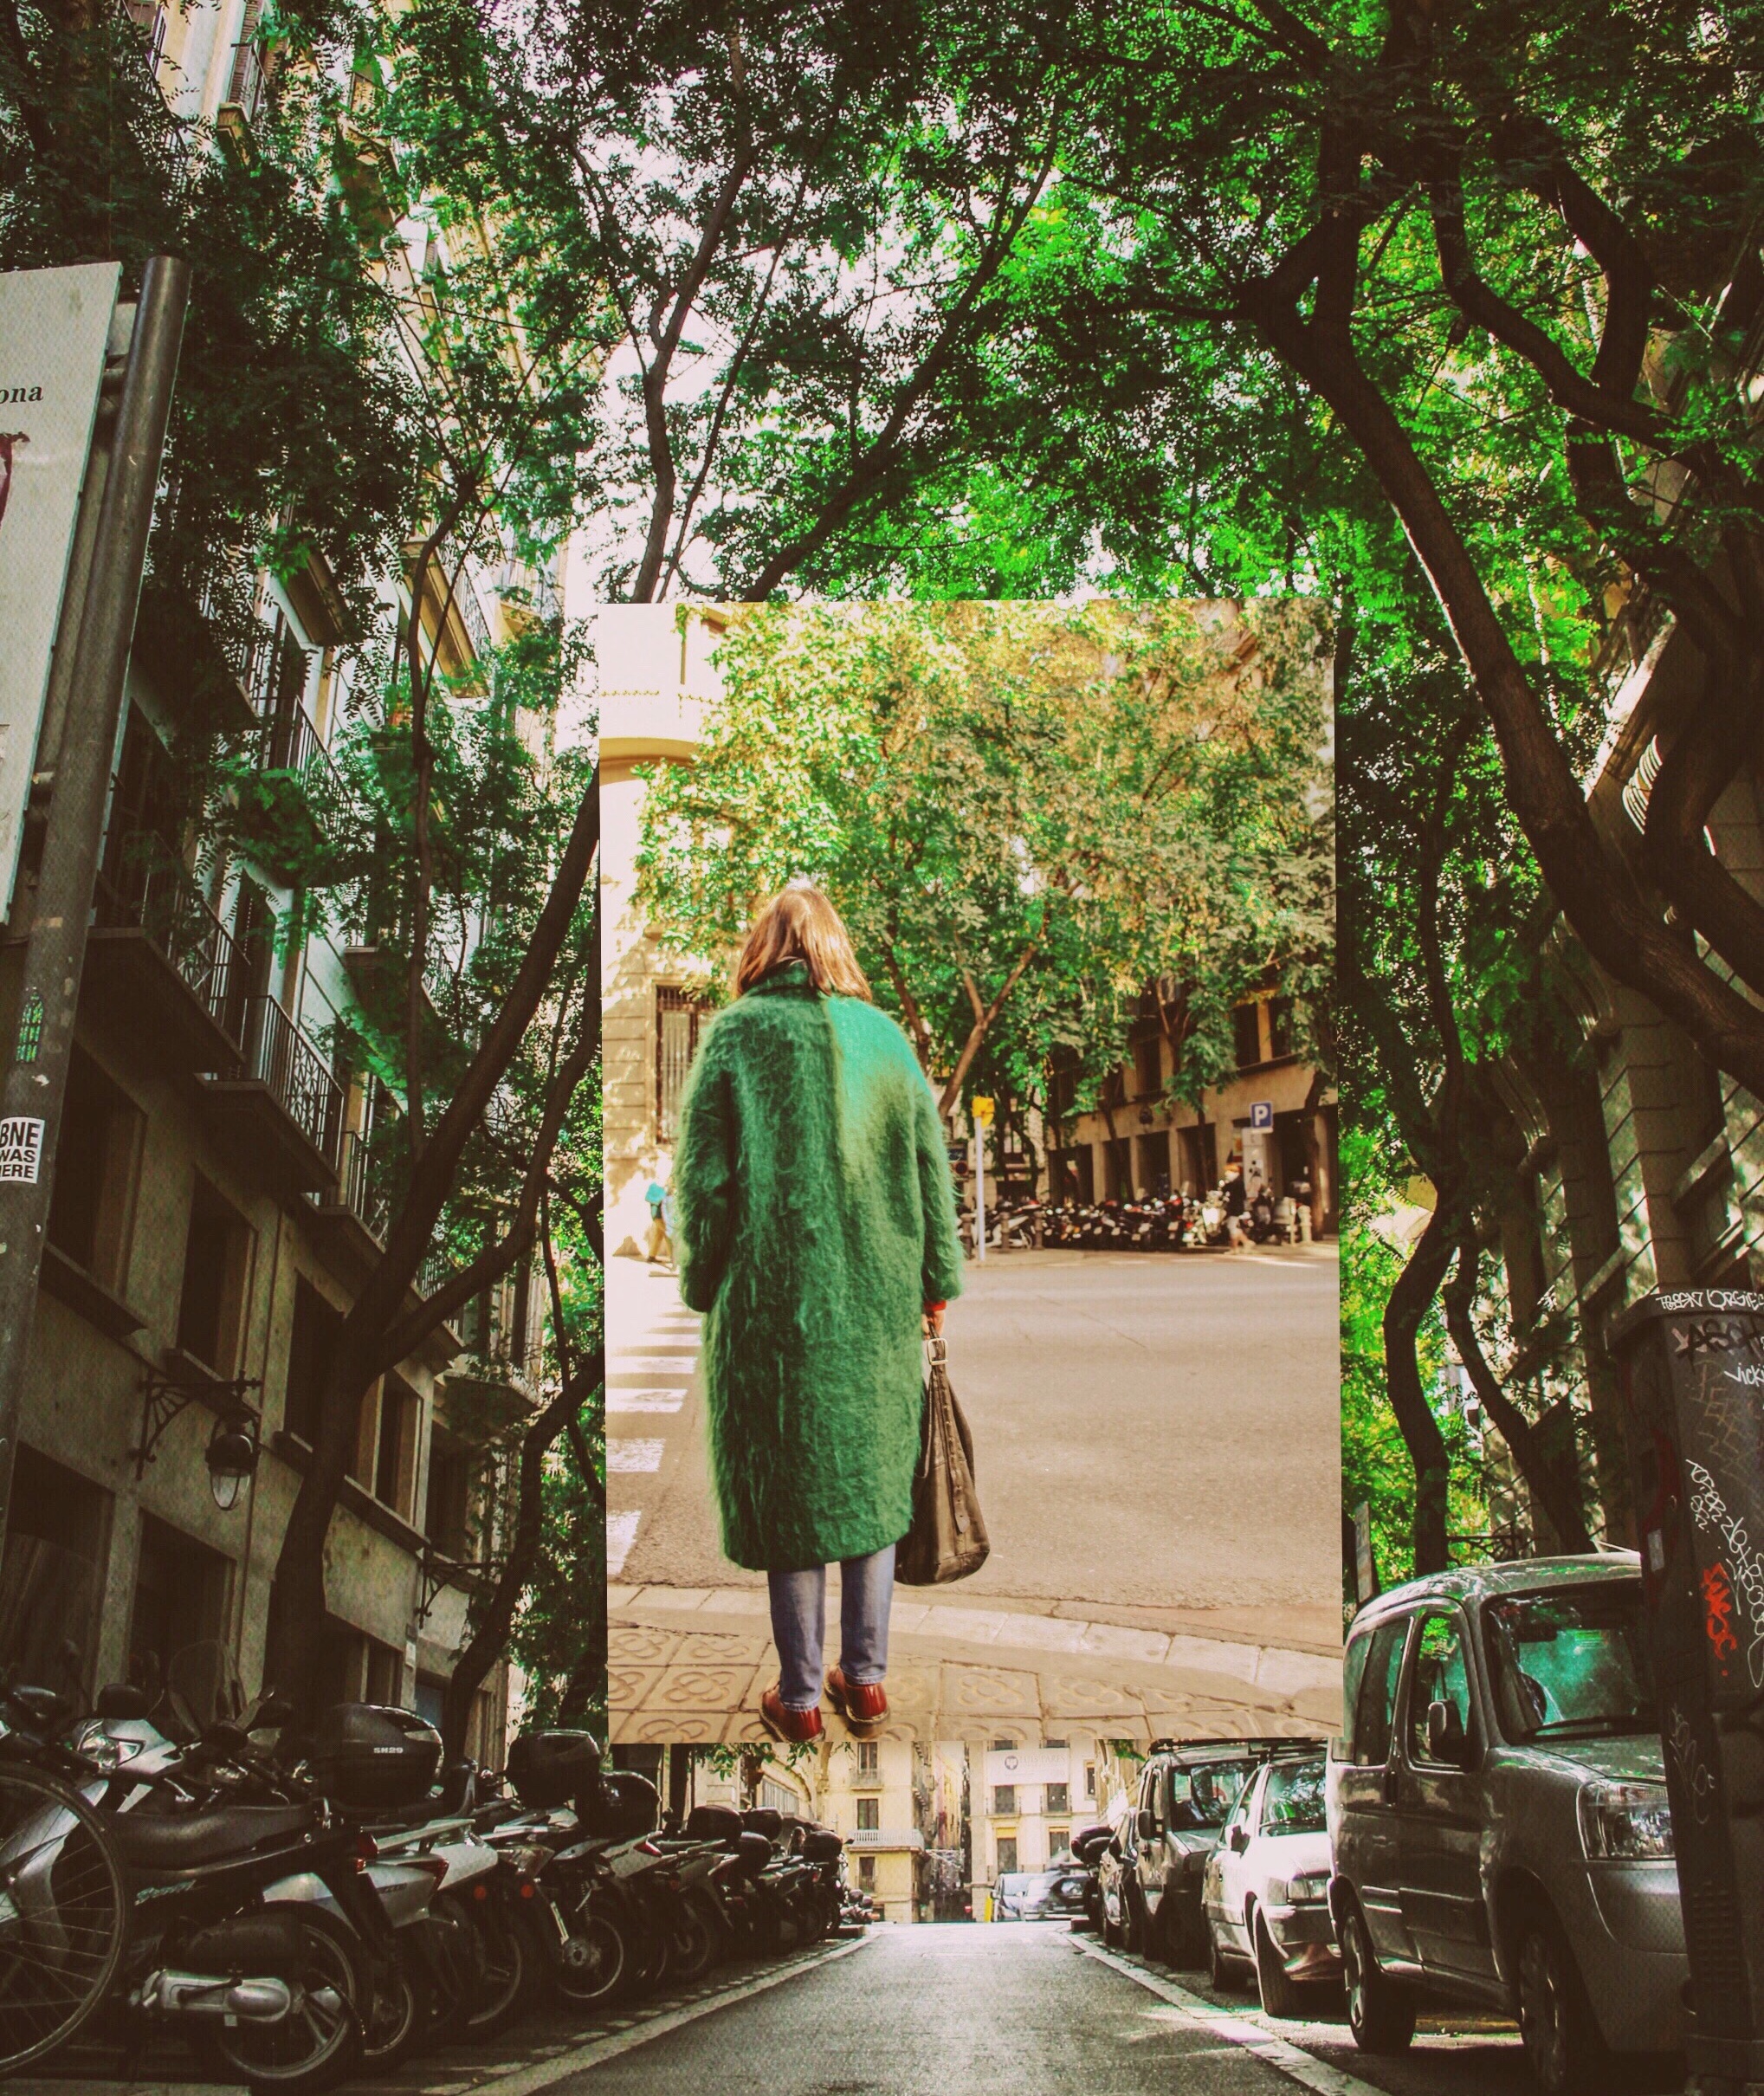 Camo - The fashion sense in Spain is definitely to die for, being the home of one of my favorite retail shops (Zara) it only makes sense for the locals to dress on point. In this photo I could not help but capture this woman in her beautiful green jacket among the greenery around her.